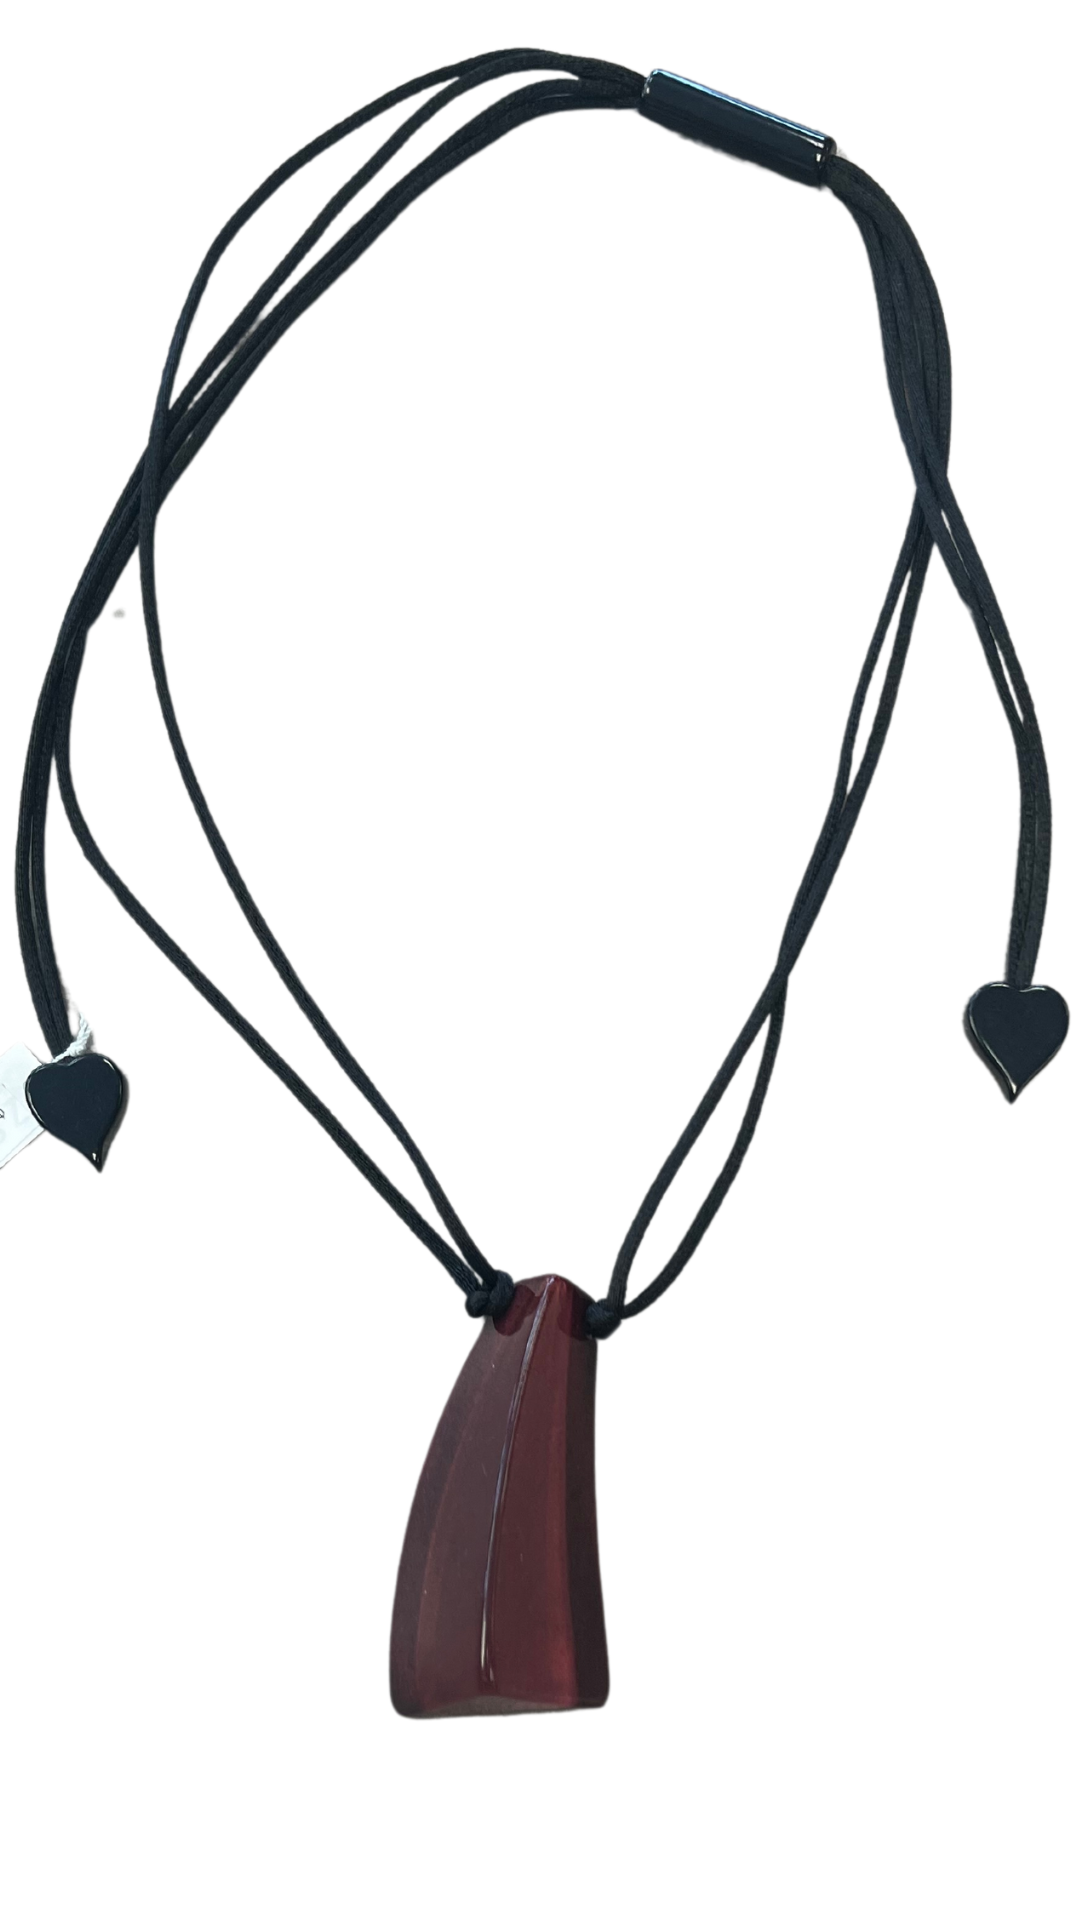 Emocion Collection - Wine Red Resin Pendant Necklace. Style 91502019260Q00